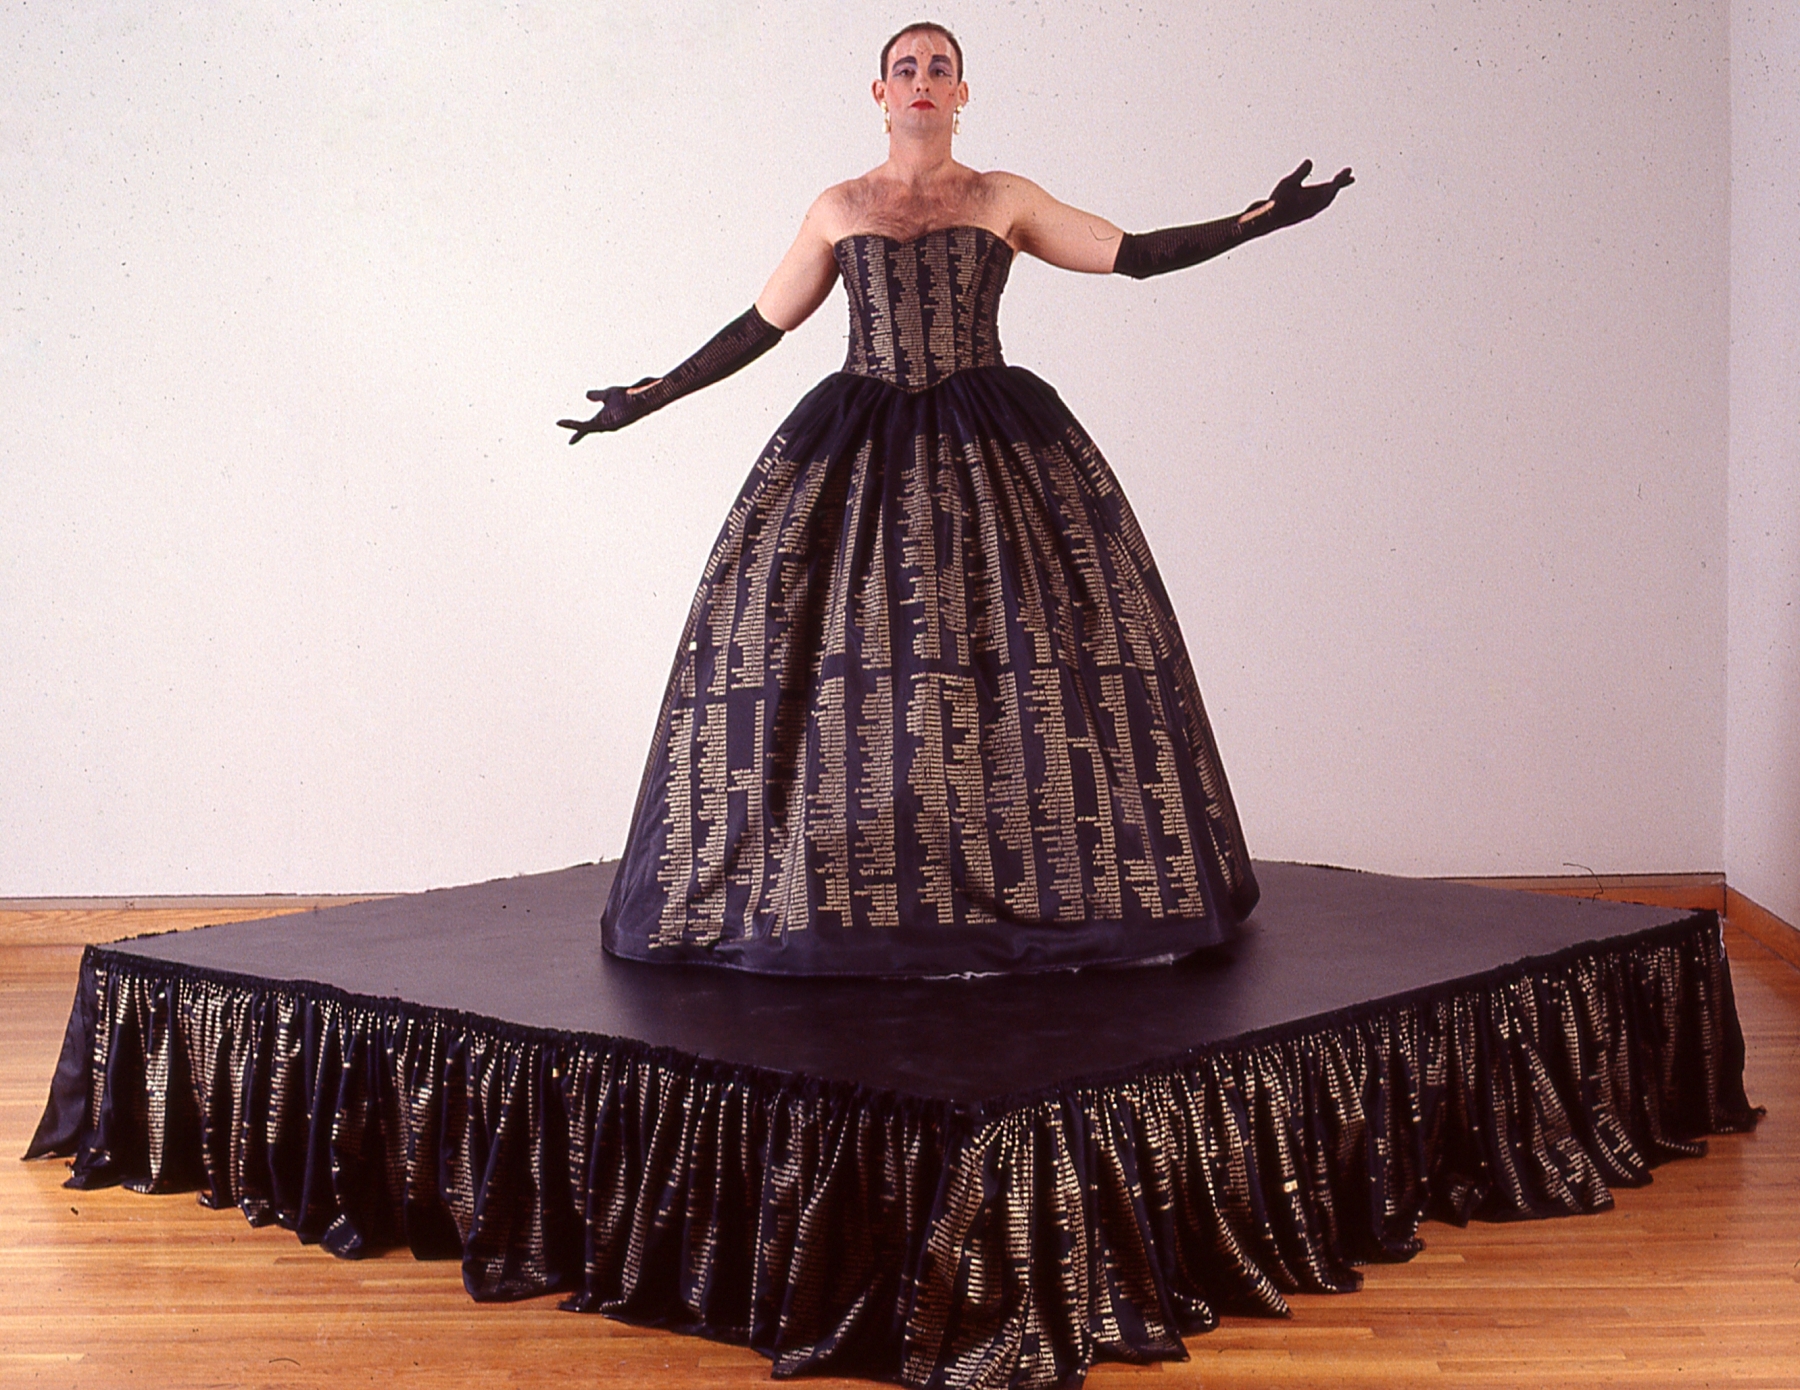 Hunter Reynolds,&amp;nbsp;Patina du Prey&amp;rsquo;s Memorial Dress, 1993. Performance view, The Institute of Contemporary Art, Boston. Photo: Charles Mayer.